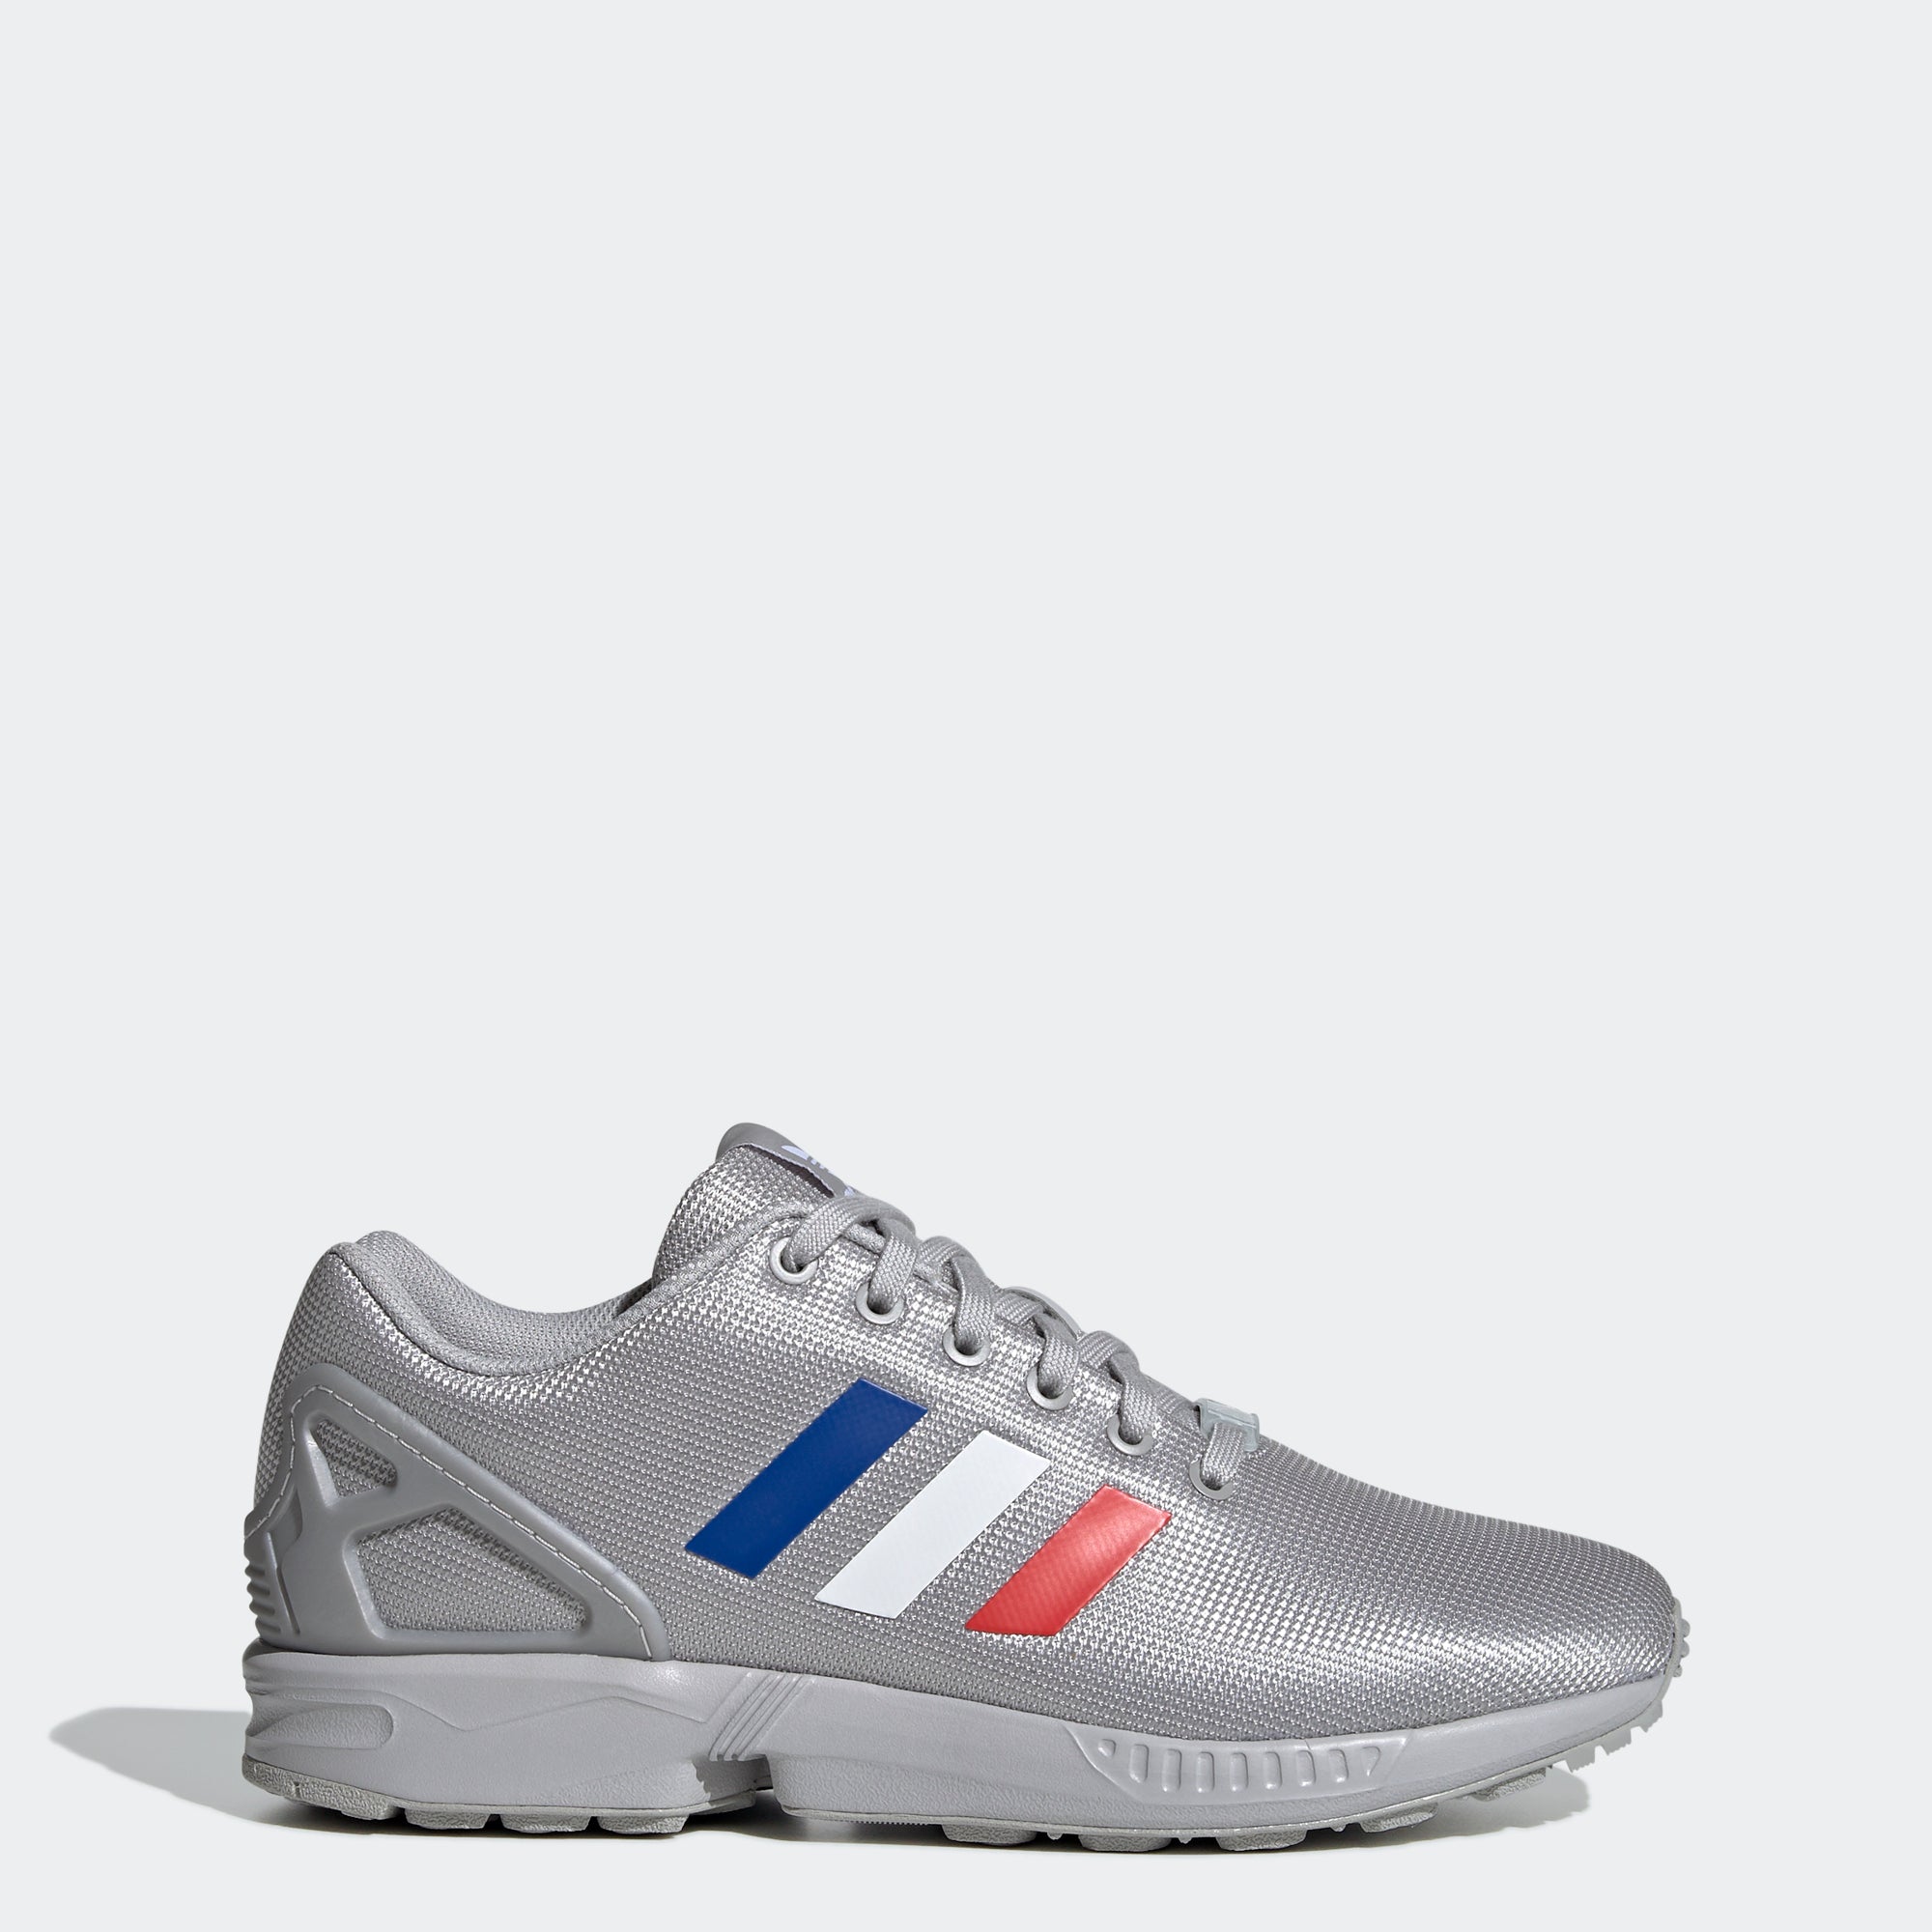 adidas ZX Flux Shoes Grey | City Sports